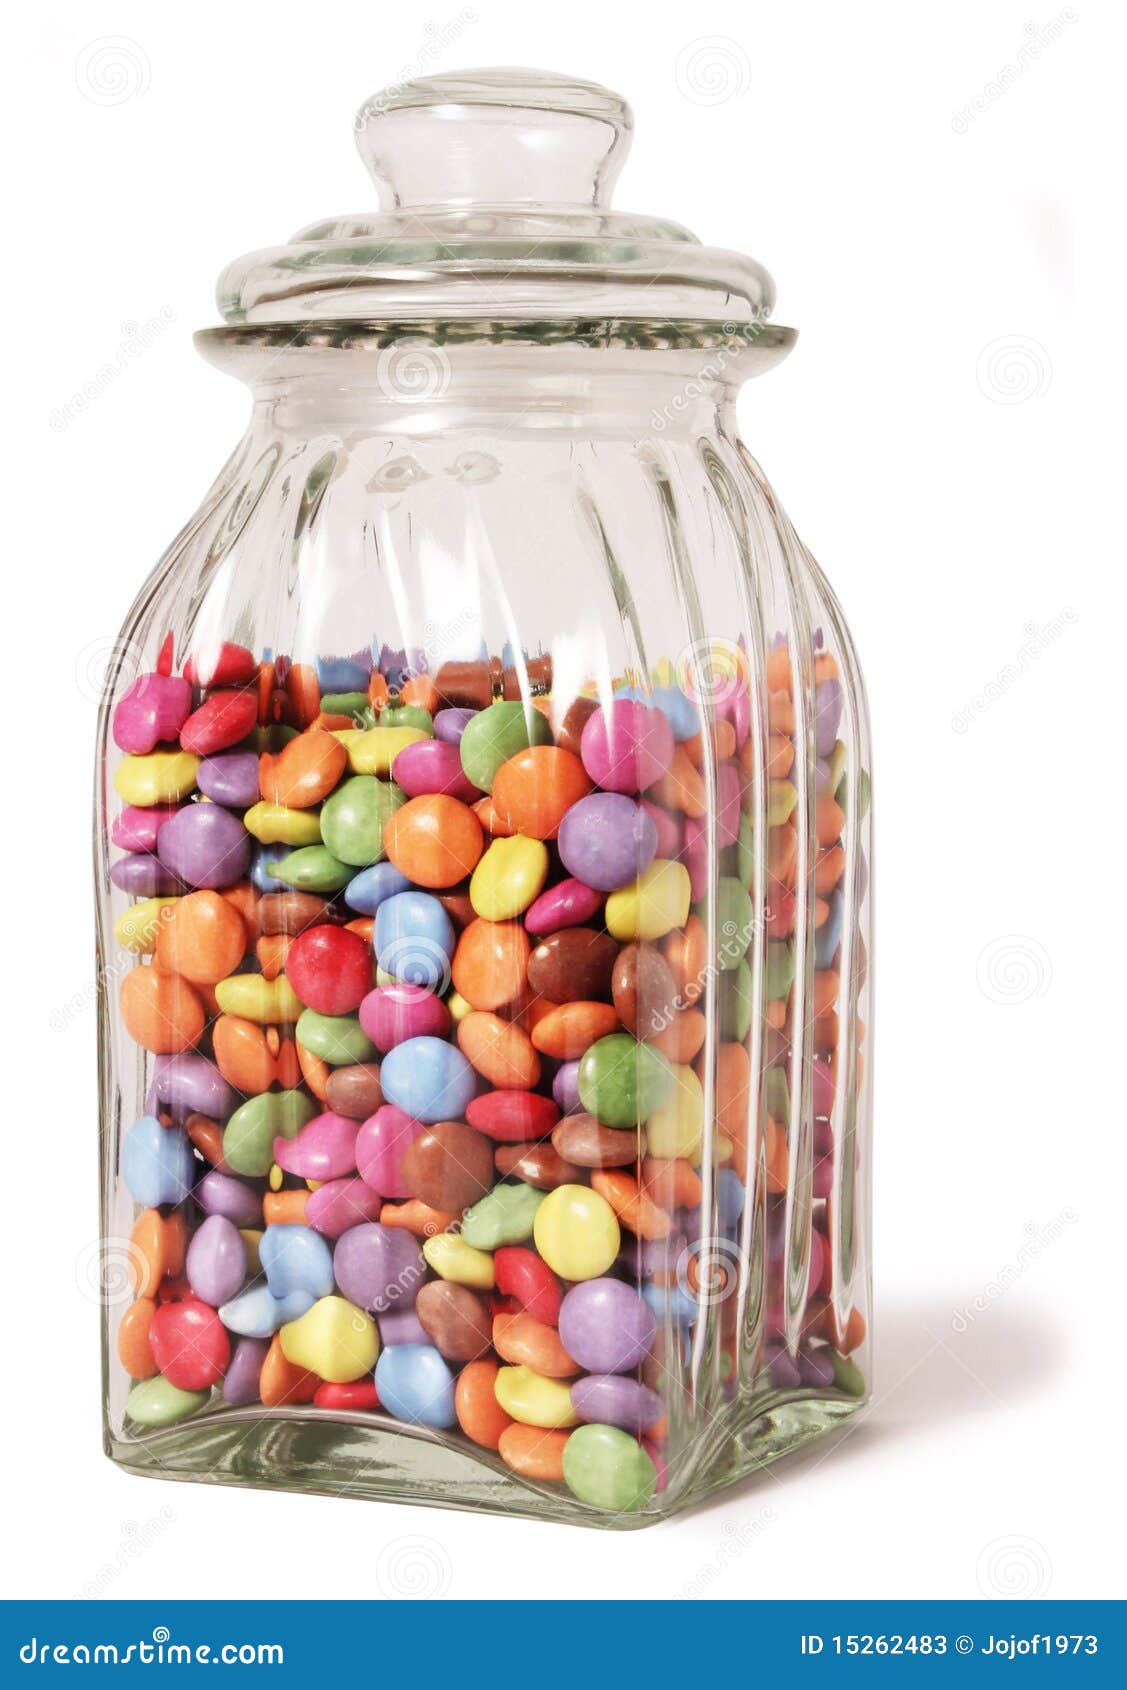 Traditional sweet jar stock image. Image of treat, delicious - 15262483